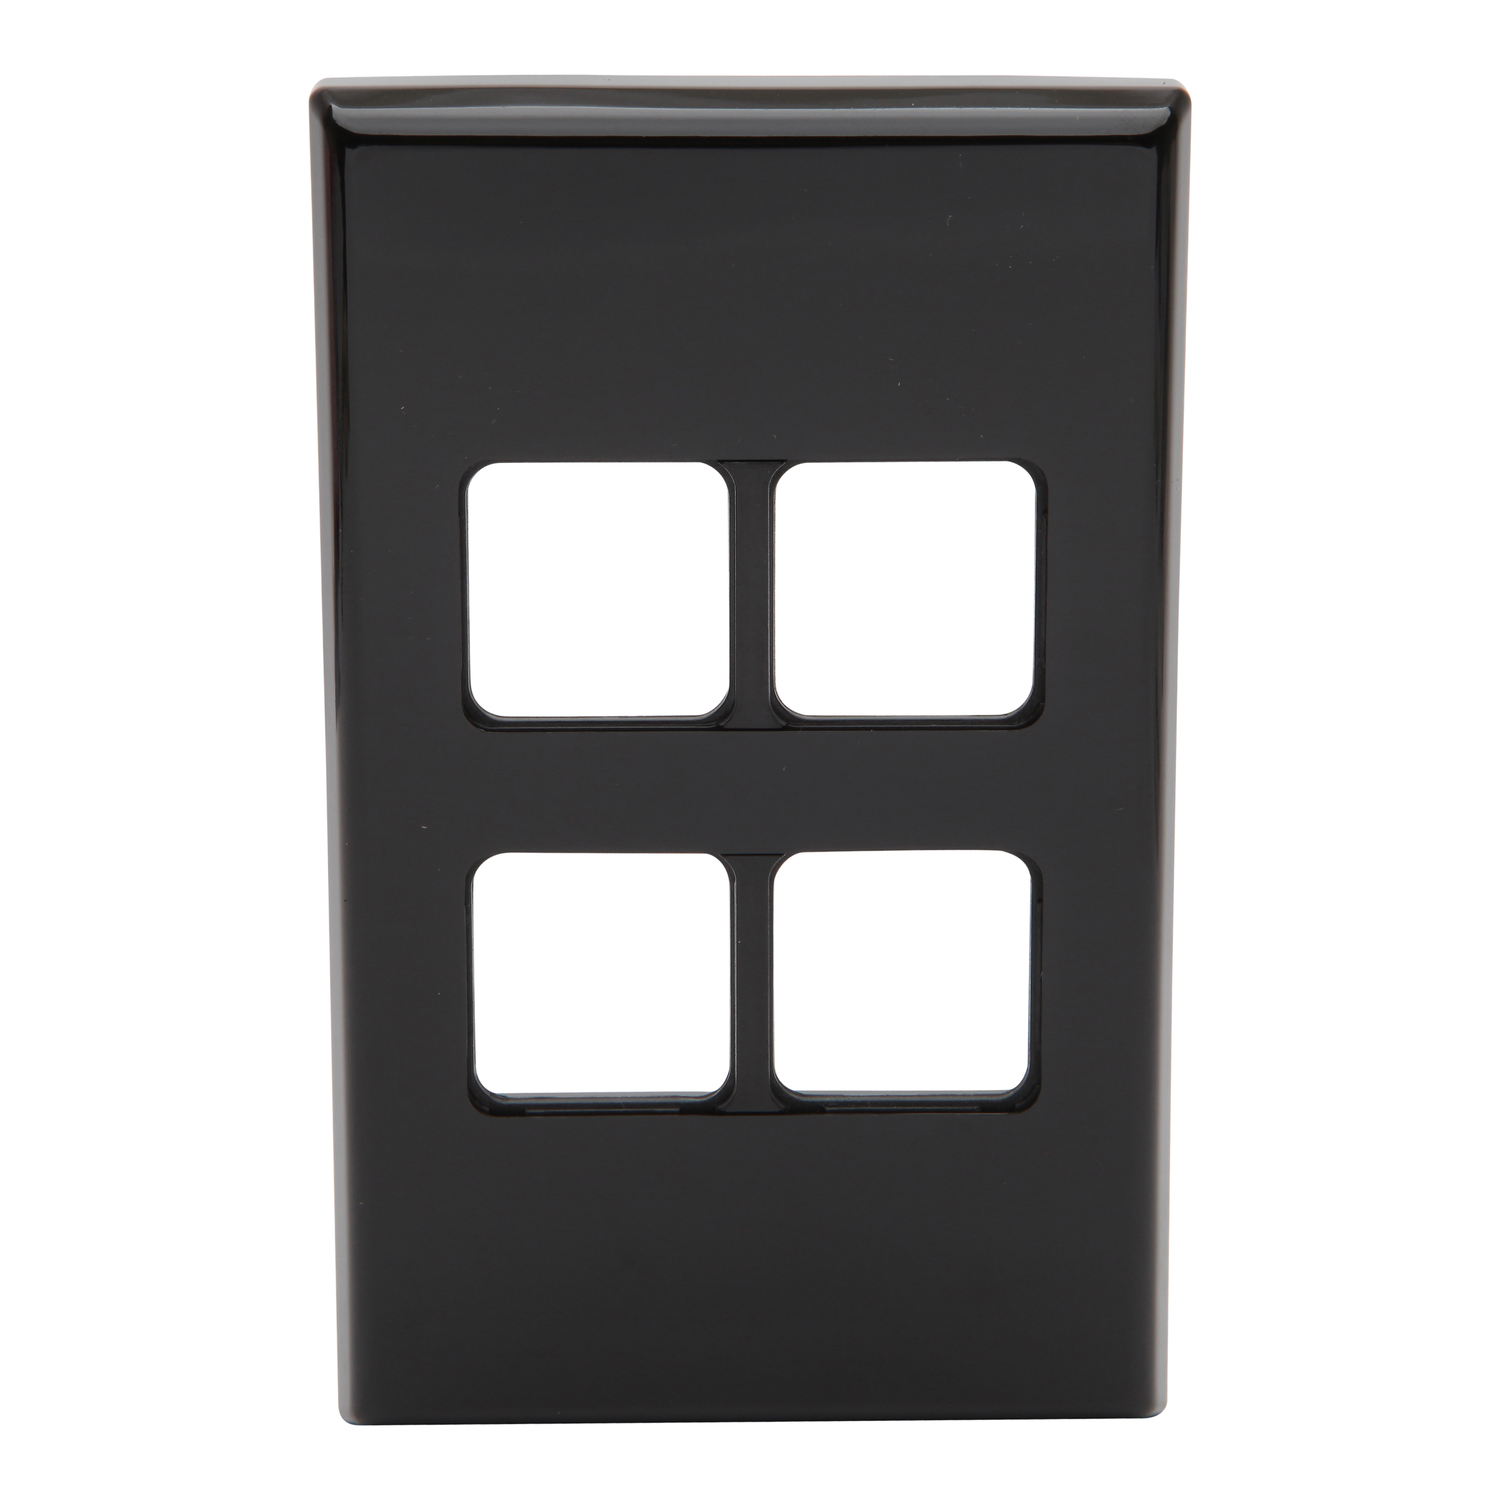 PDL 600 Series - Grid + Cover Plate Switch 4-Gang - Black